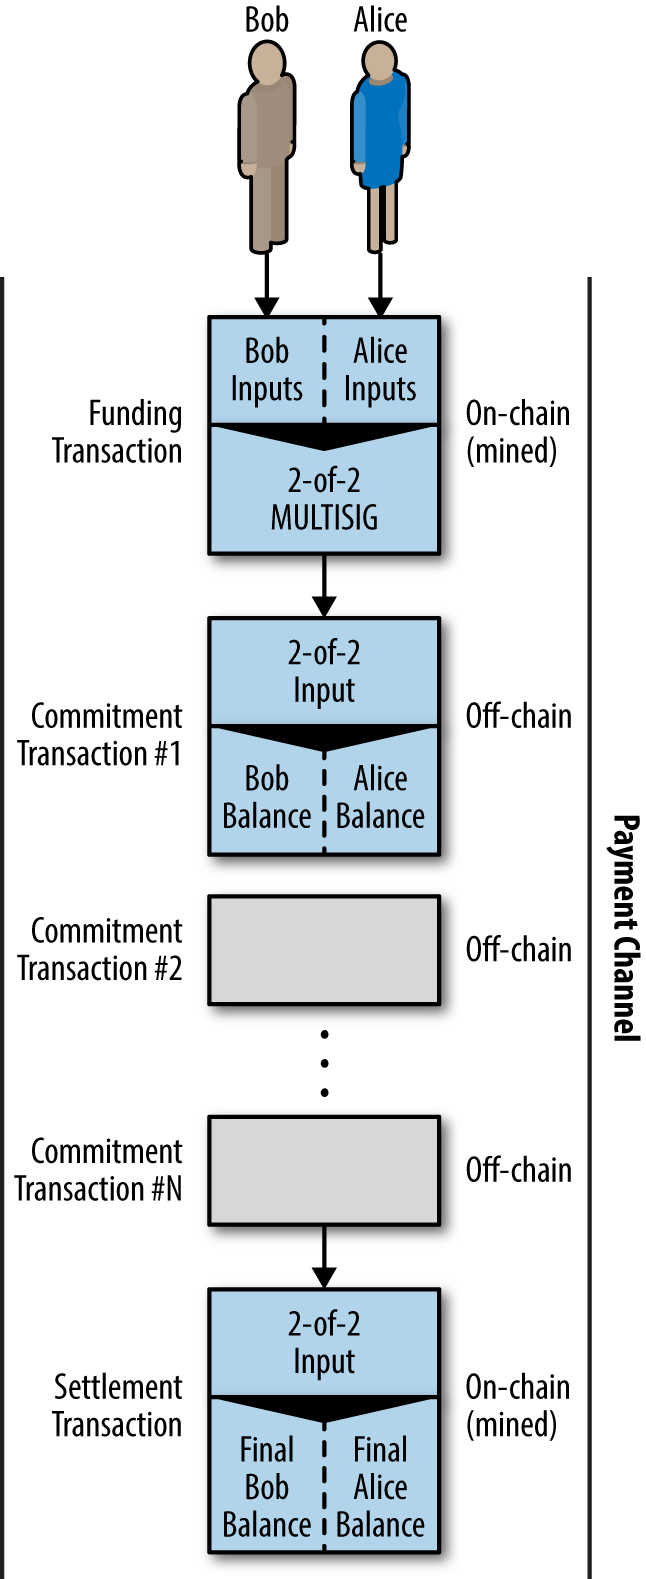 A payment channel between Bob and Alice, showing the funding, commitment, and settlement transactions